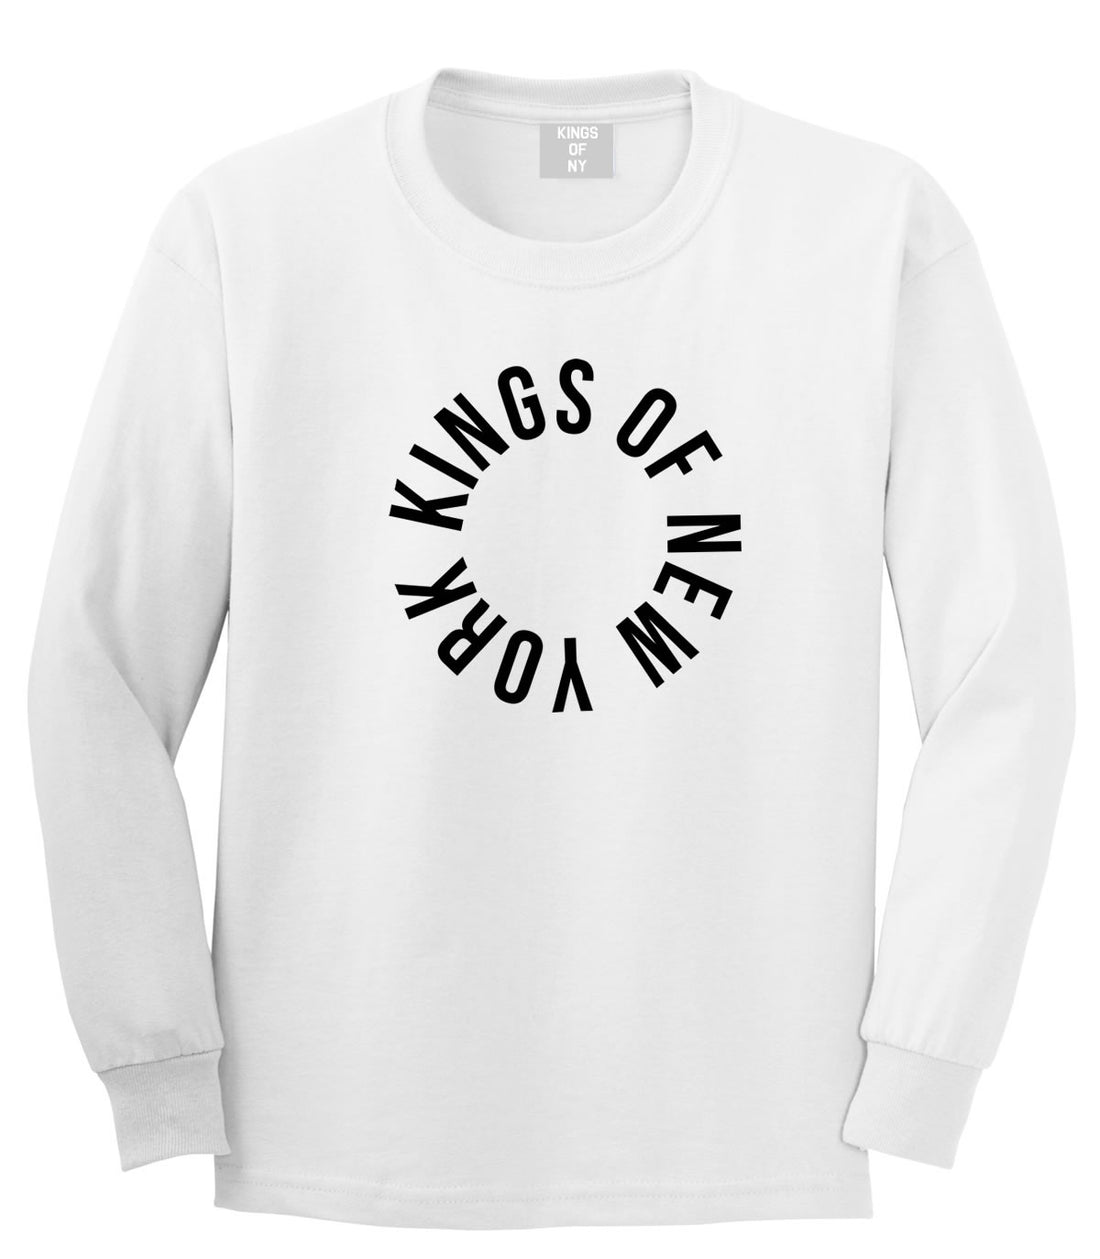 Kings Of NY Circle Logo New York Round About Long Sleeve T-Shirt in White